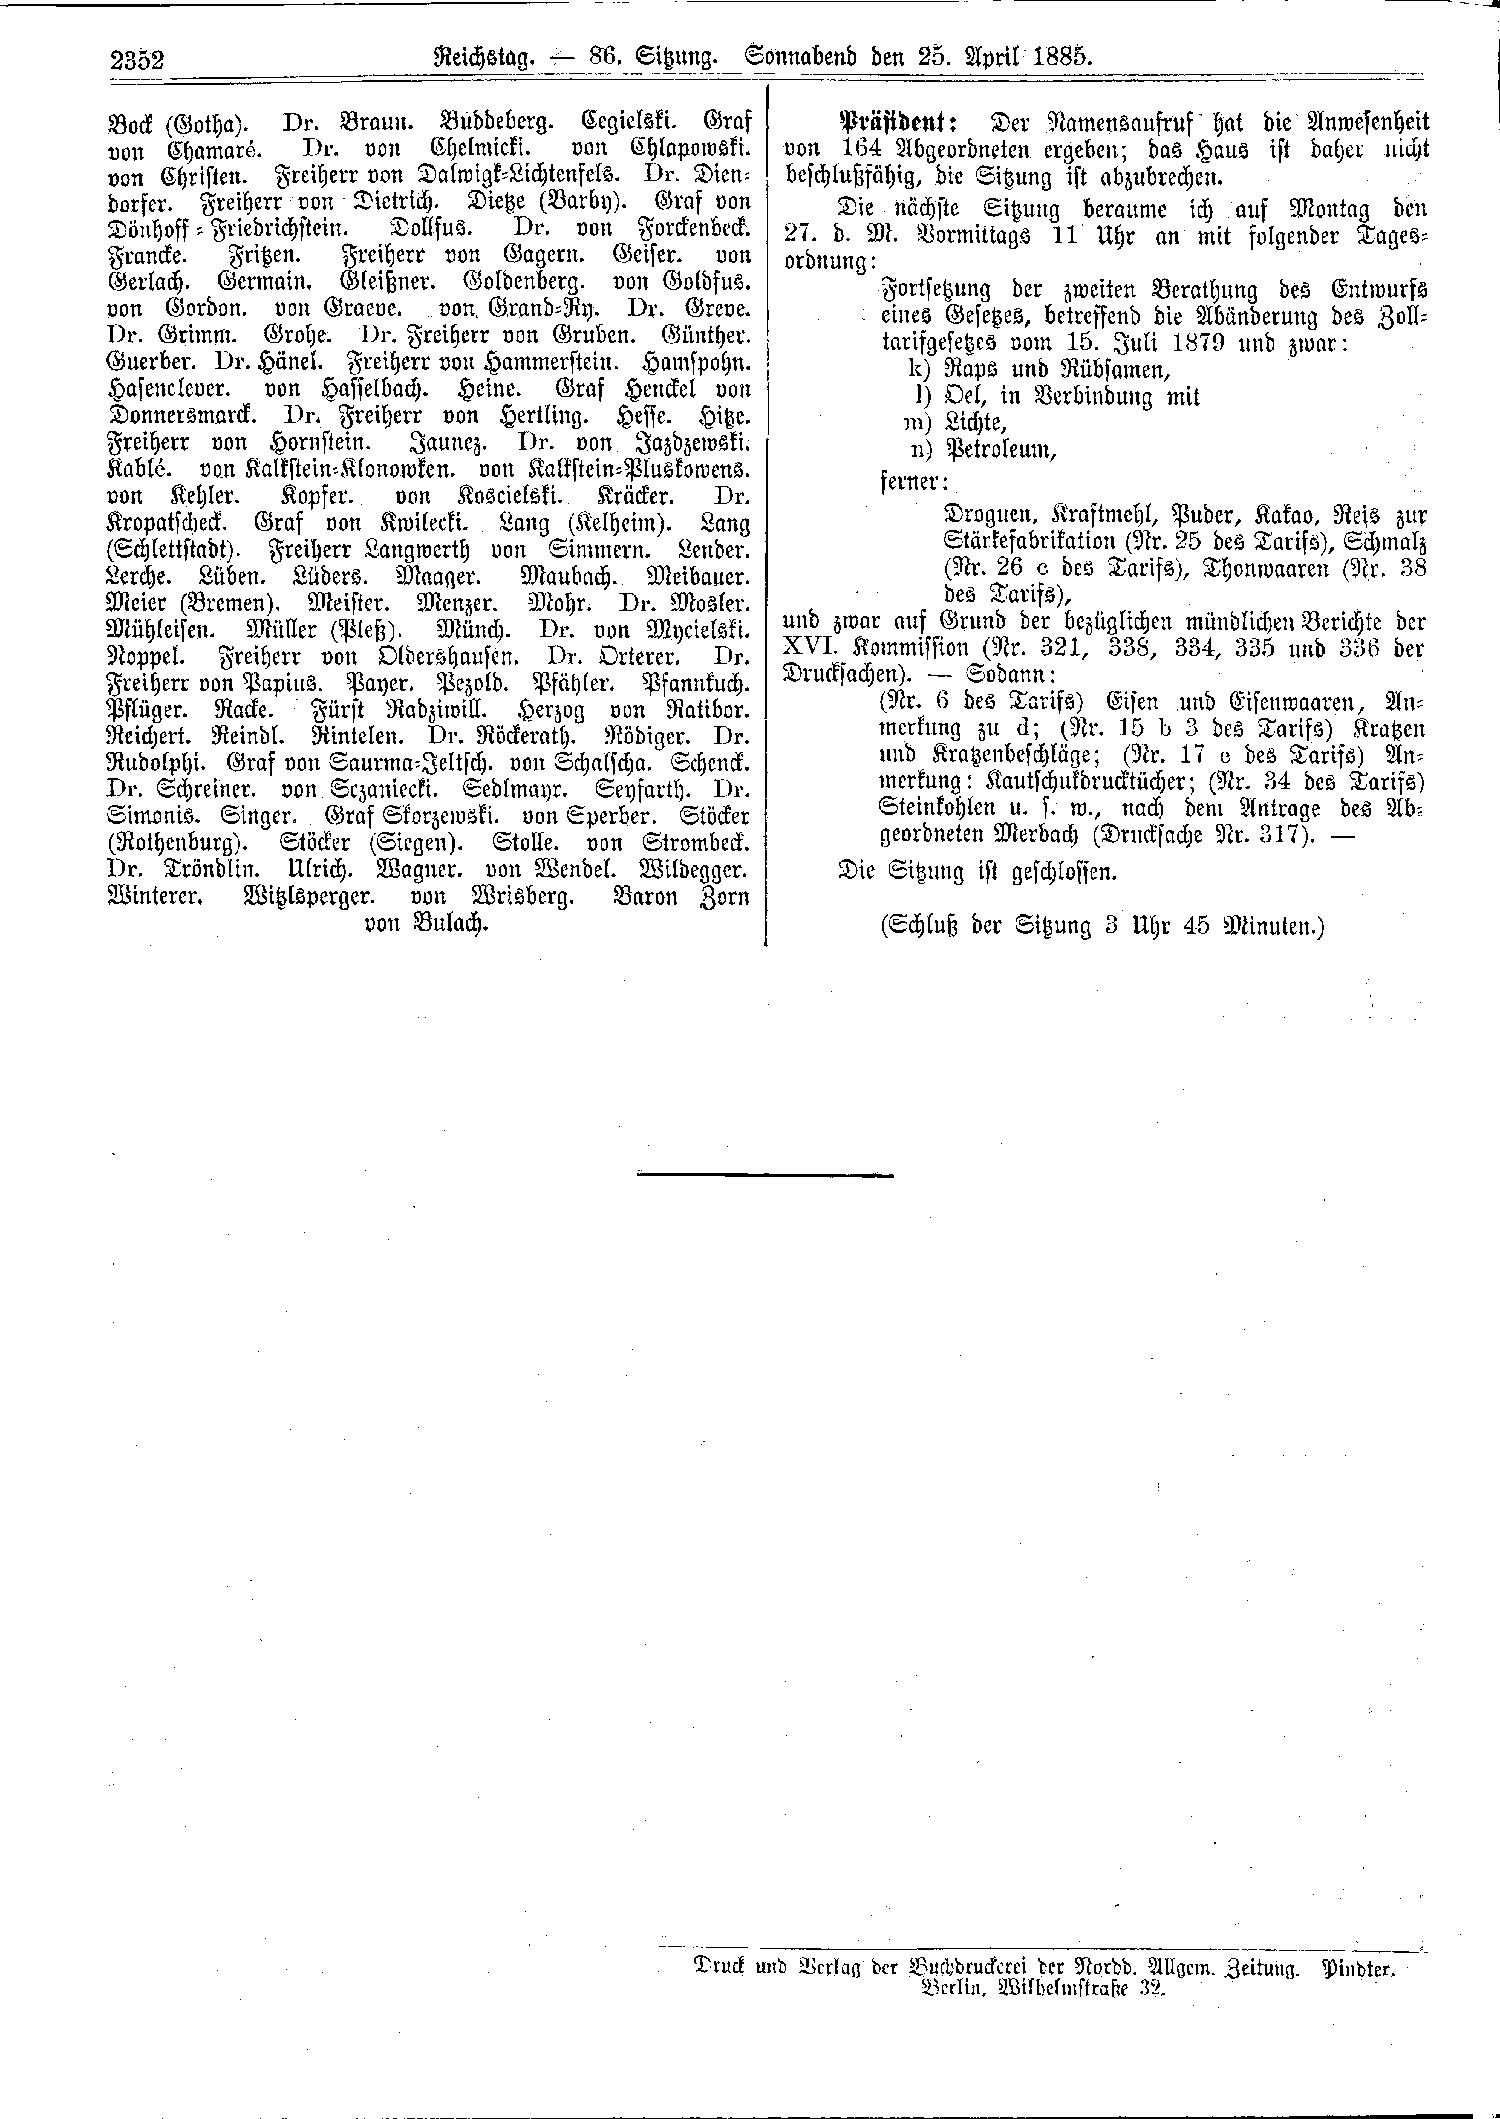 Scan of page 2352